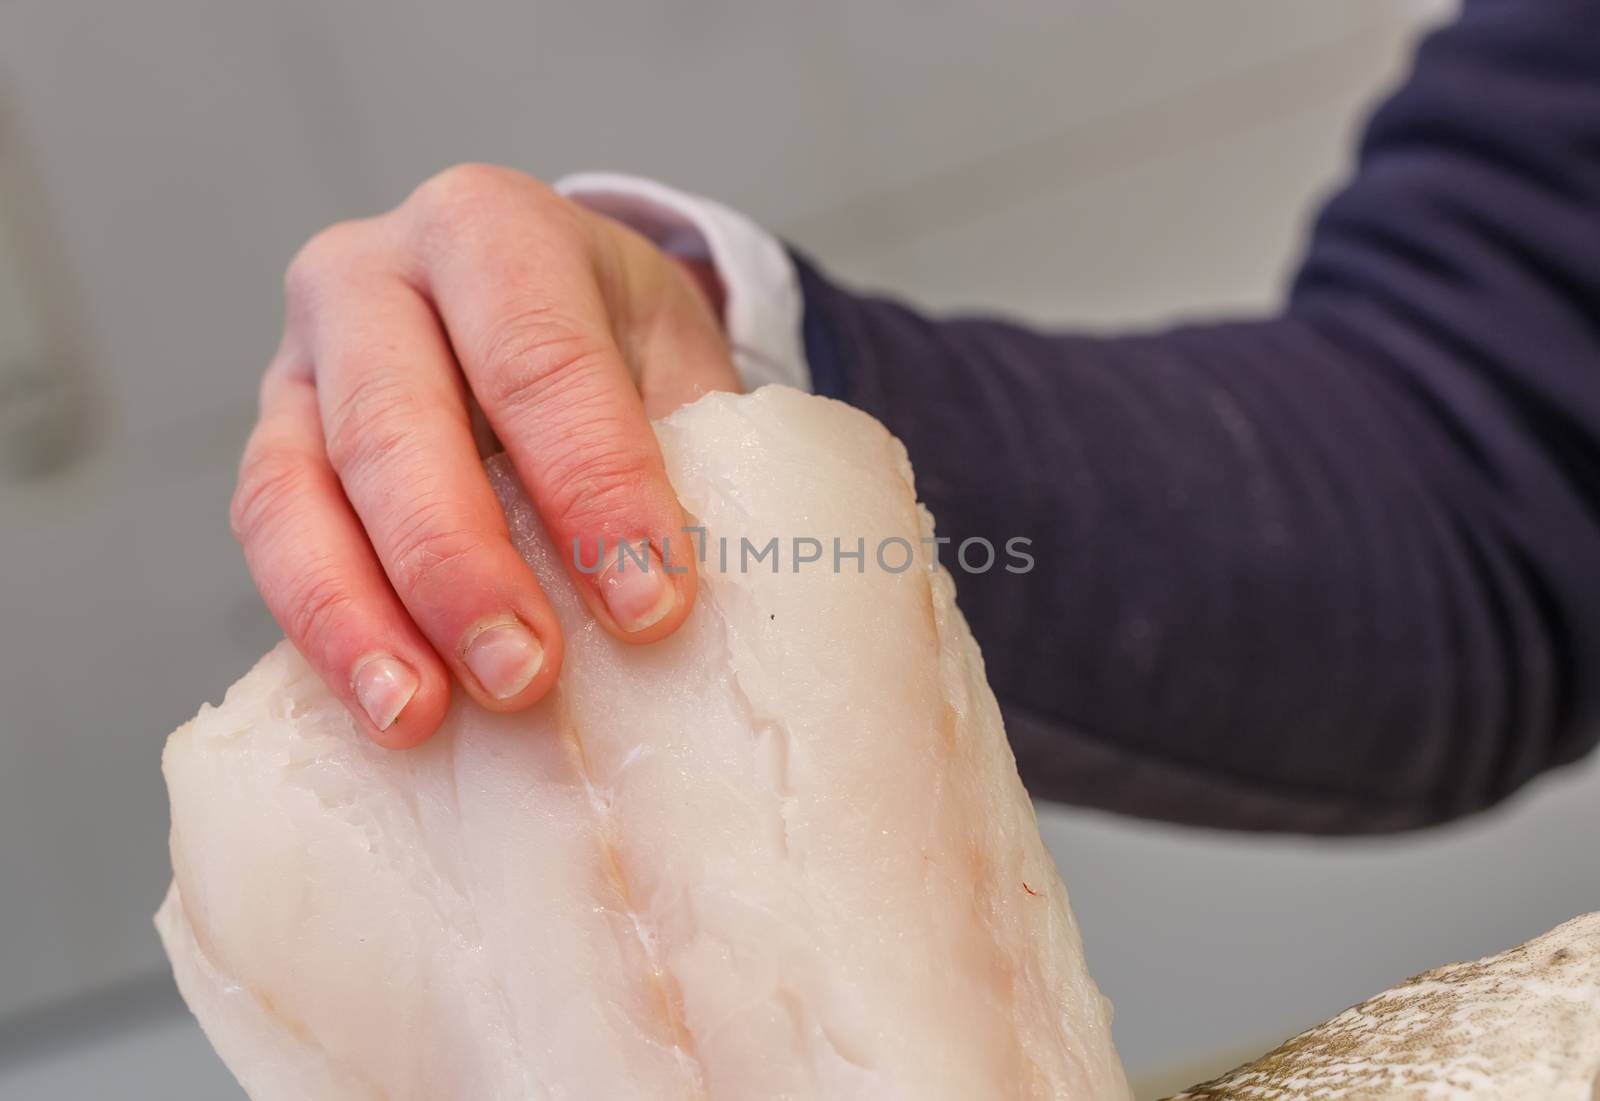 Fishmonger holding a piece of fresh fish in a market